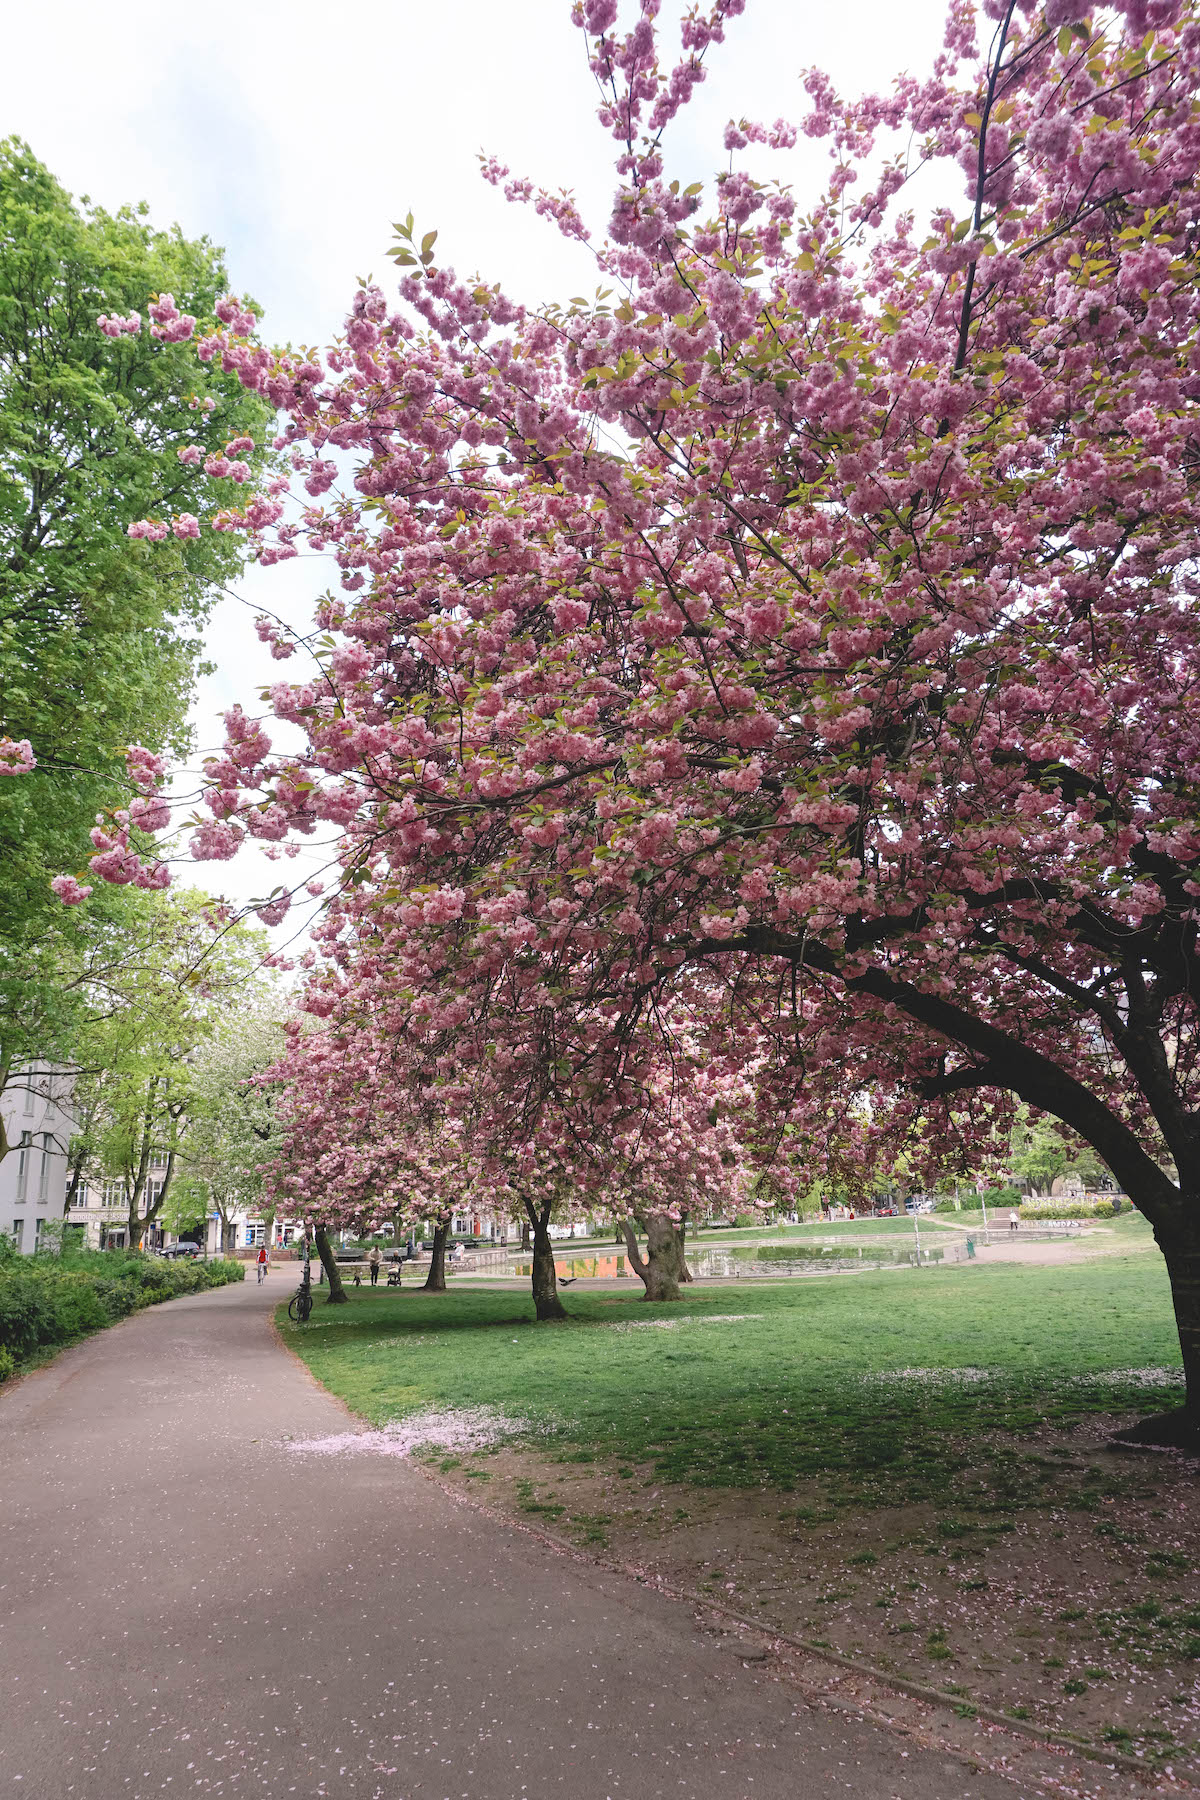 A dirt path running past a blooming cherry blossom tree